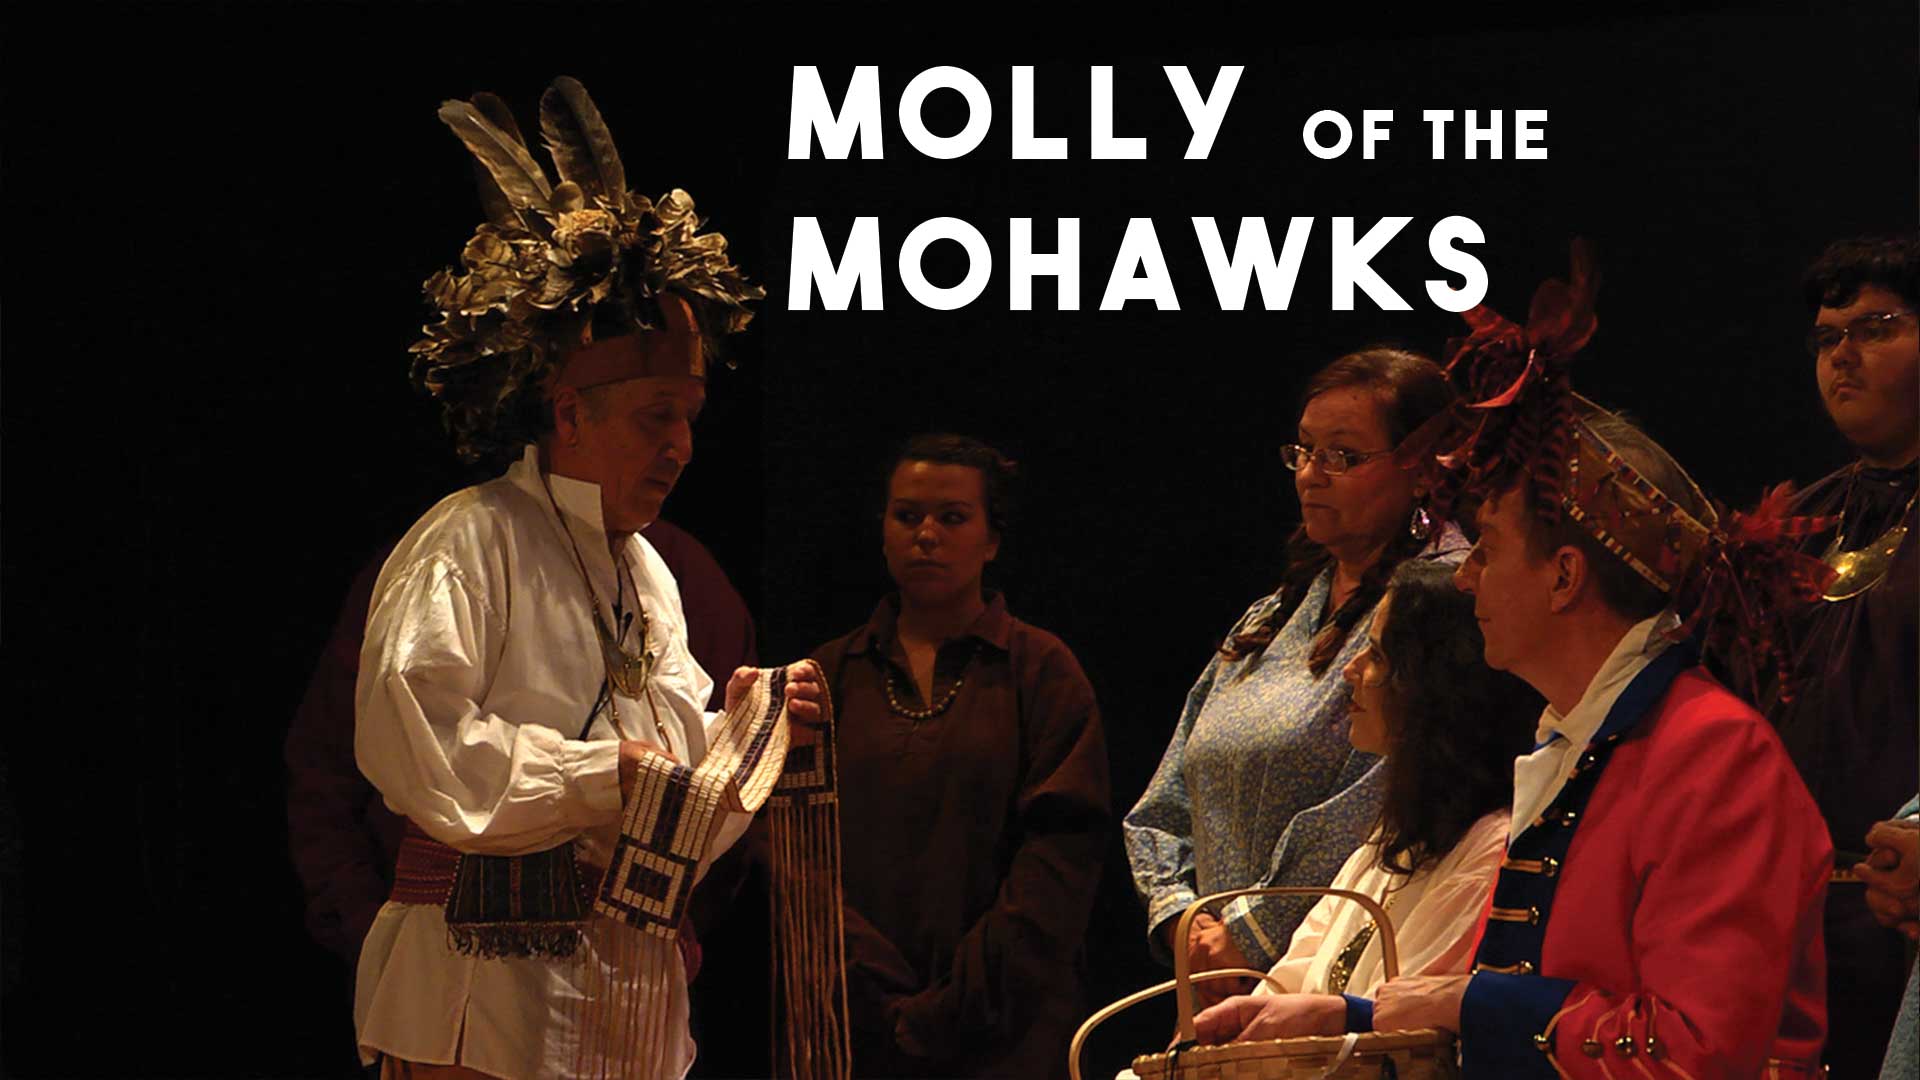 Molly of the Mohawks